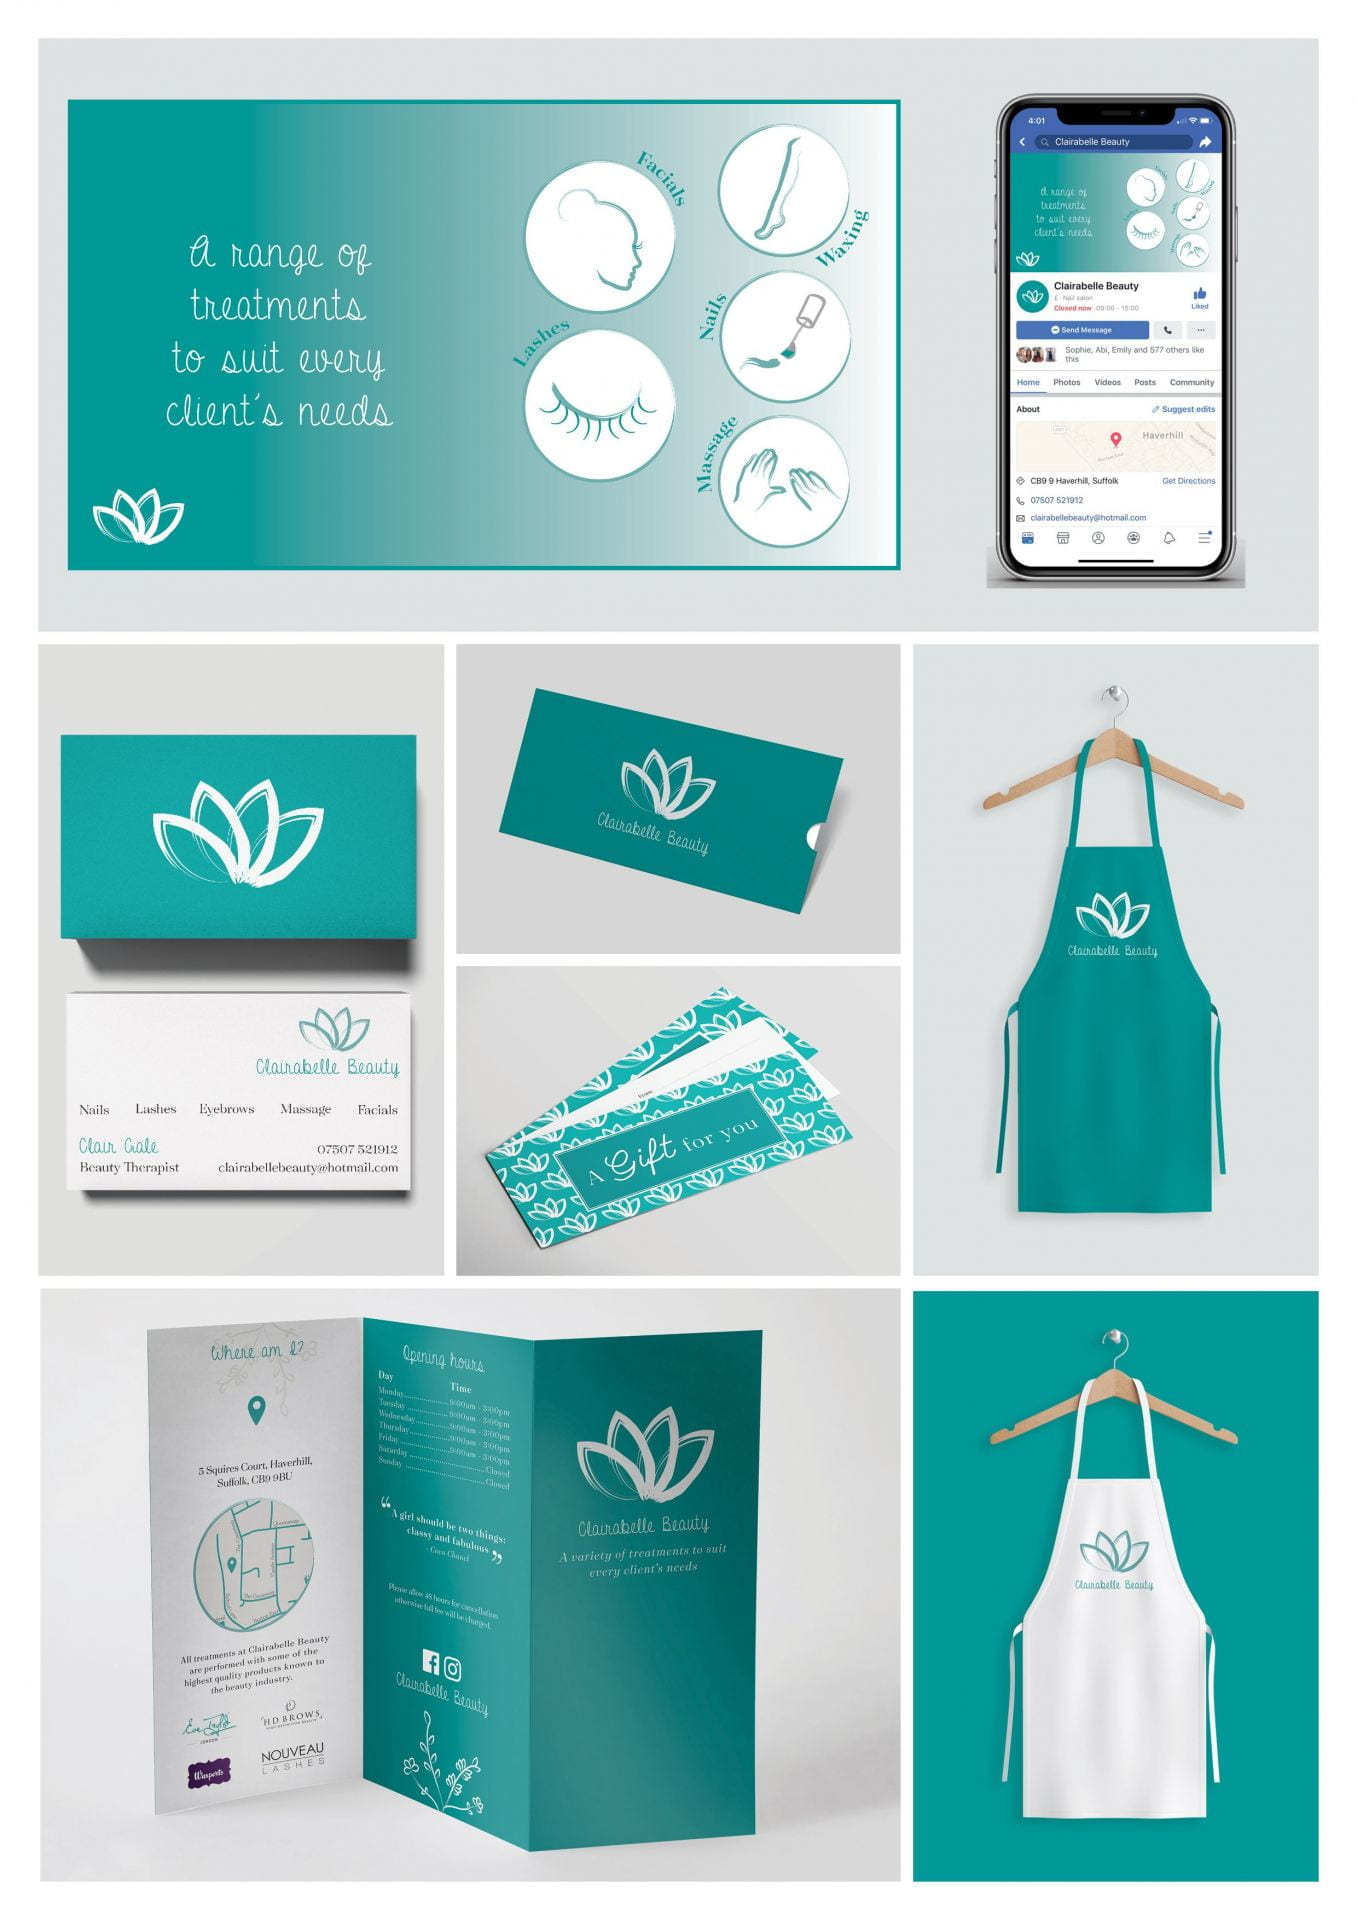 Products such as an apron, an app, and various leaflets, all using a teal and white theme.